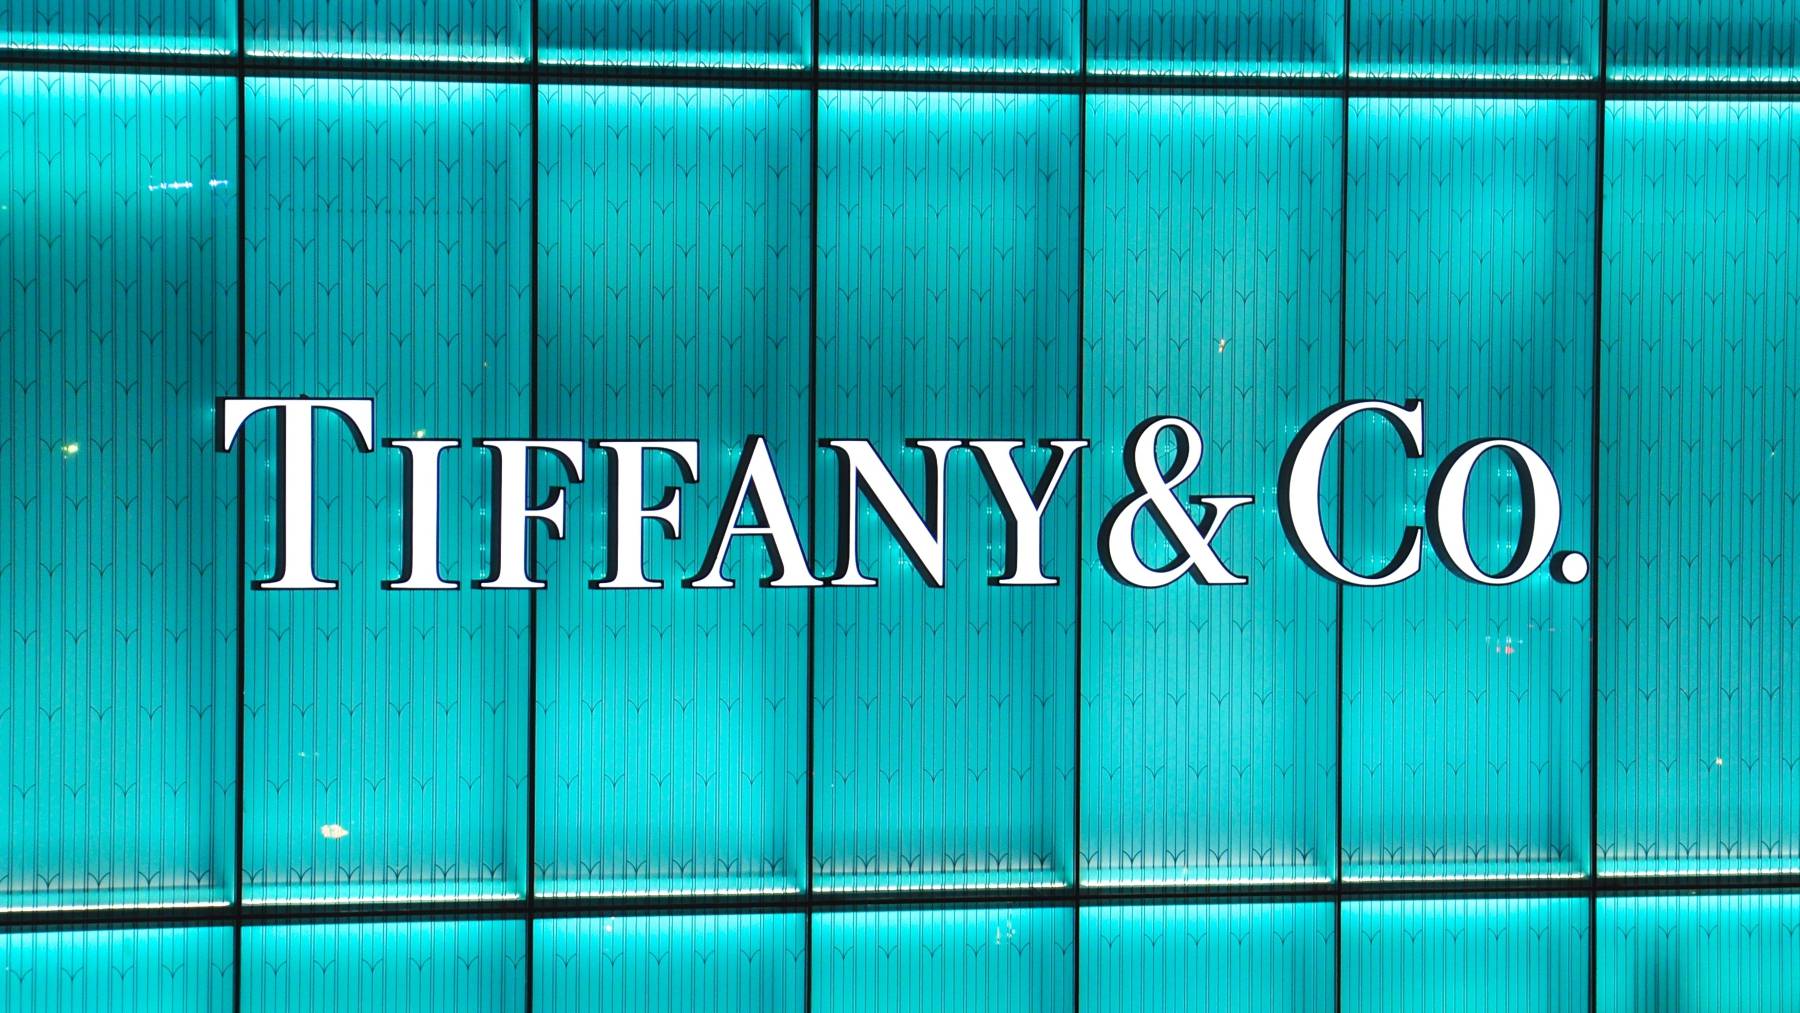 The Tiffany logo against a background in the company's signature blue.